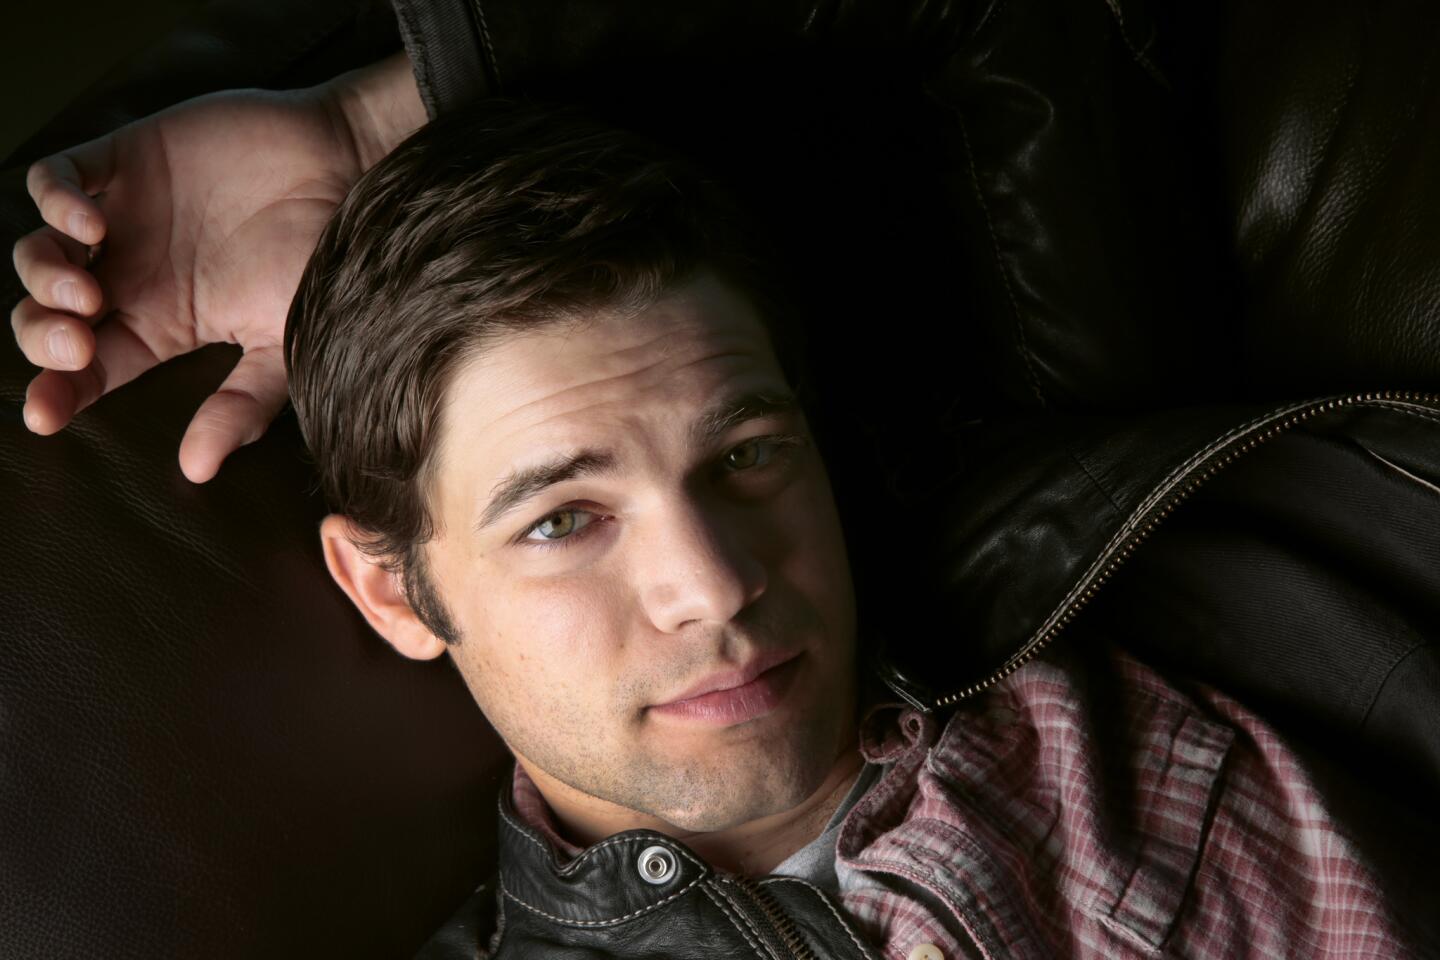 Arts and culture in pictures by The Times | Jeremy Jordan